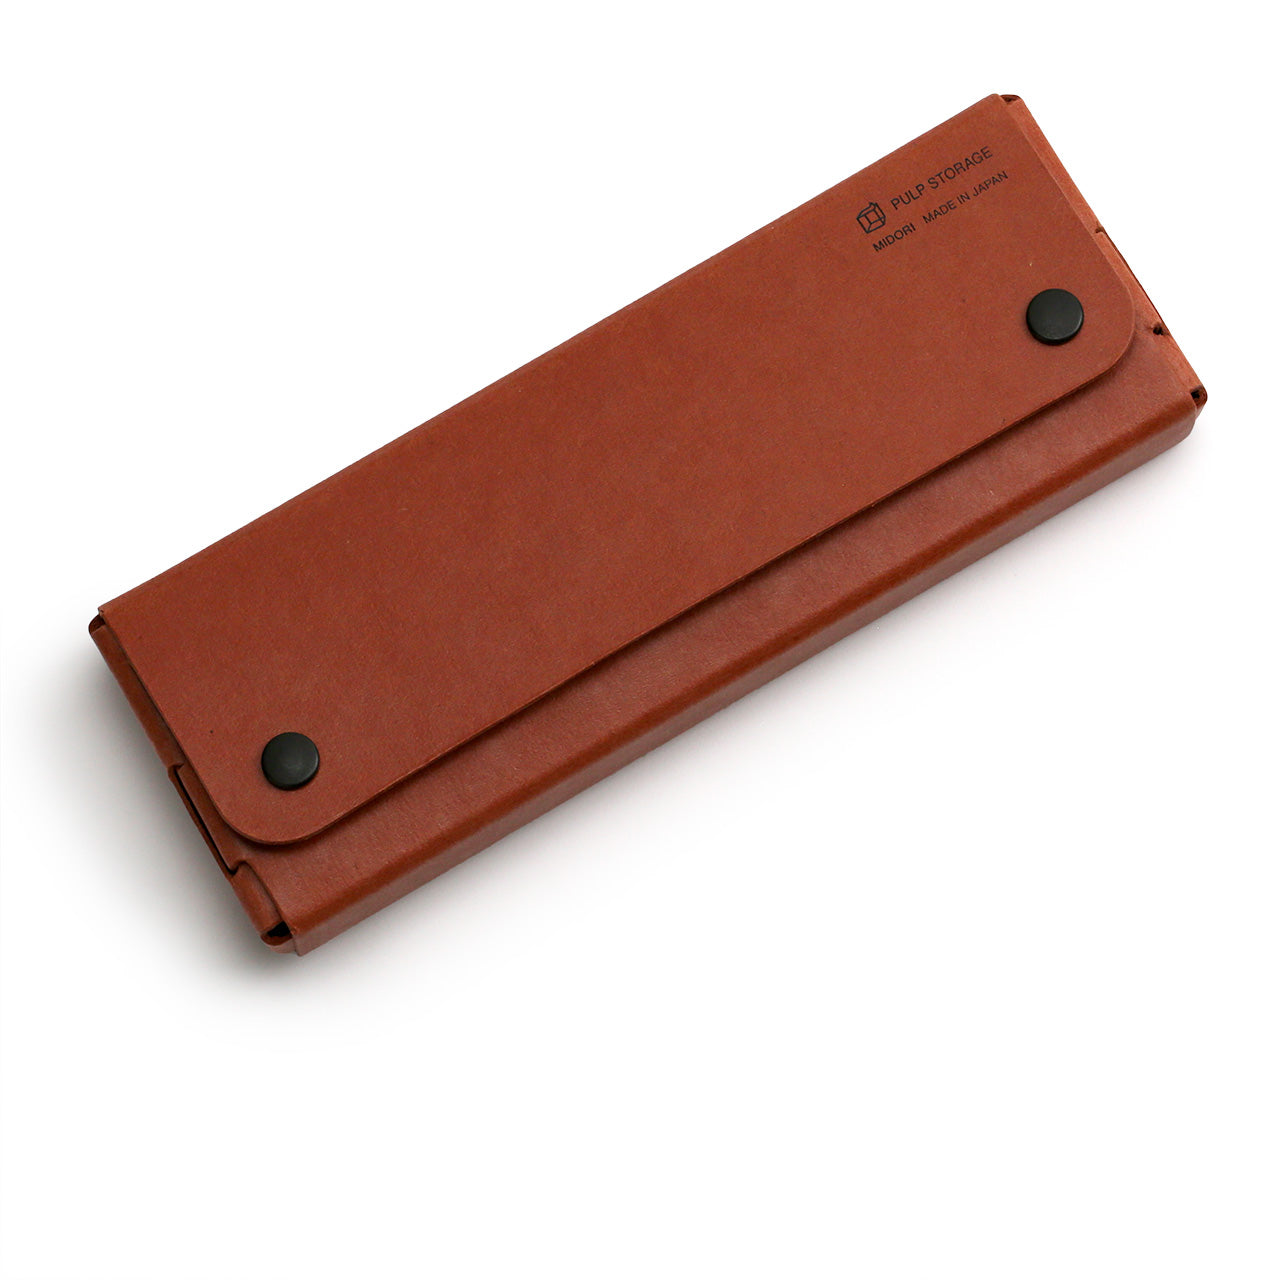 Tan pencil case made from paper pulp is a hard finish folded into a protective pencil case with stud closures